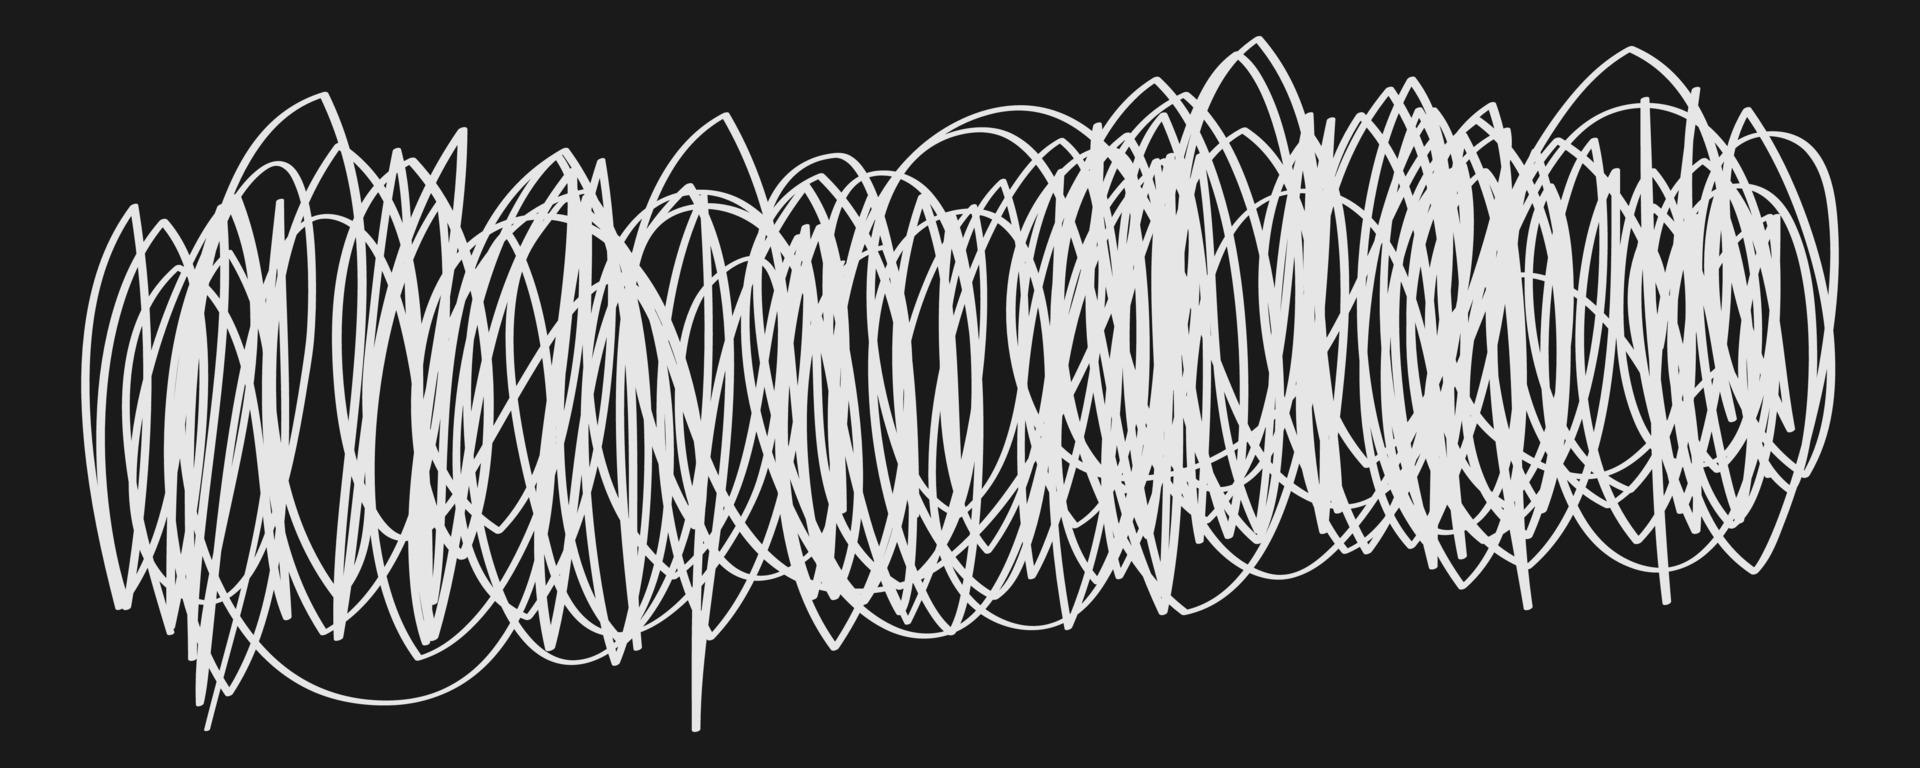 hand drawn abstract scribble doodle vector